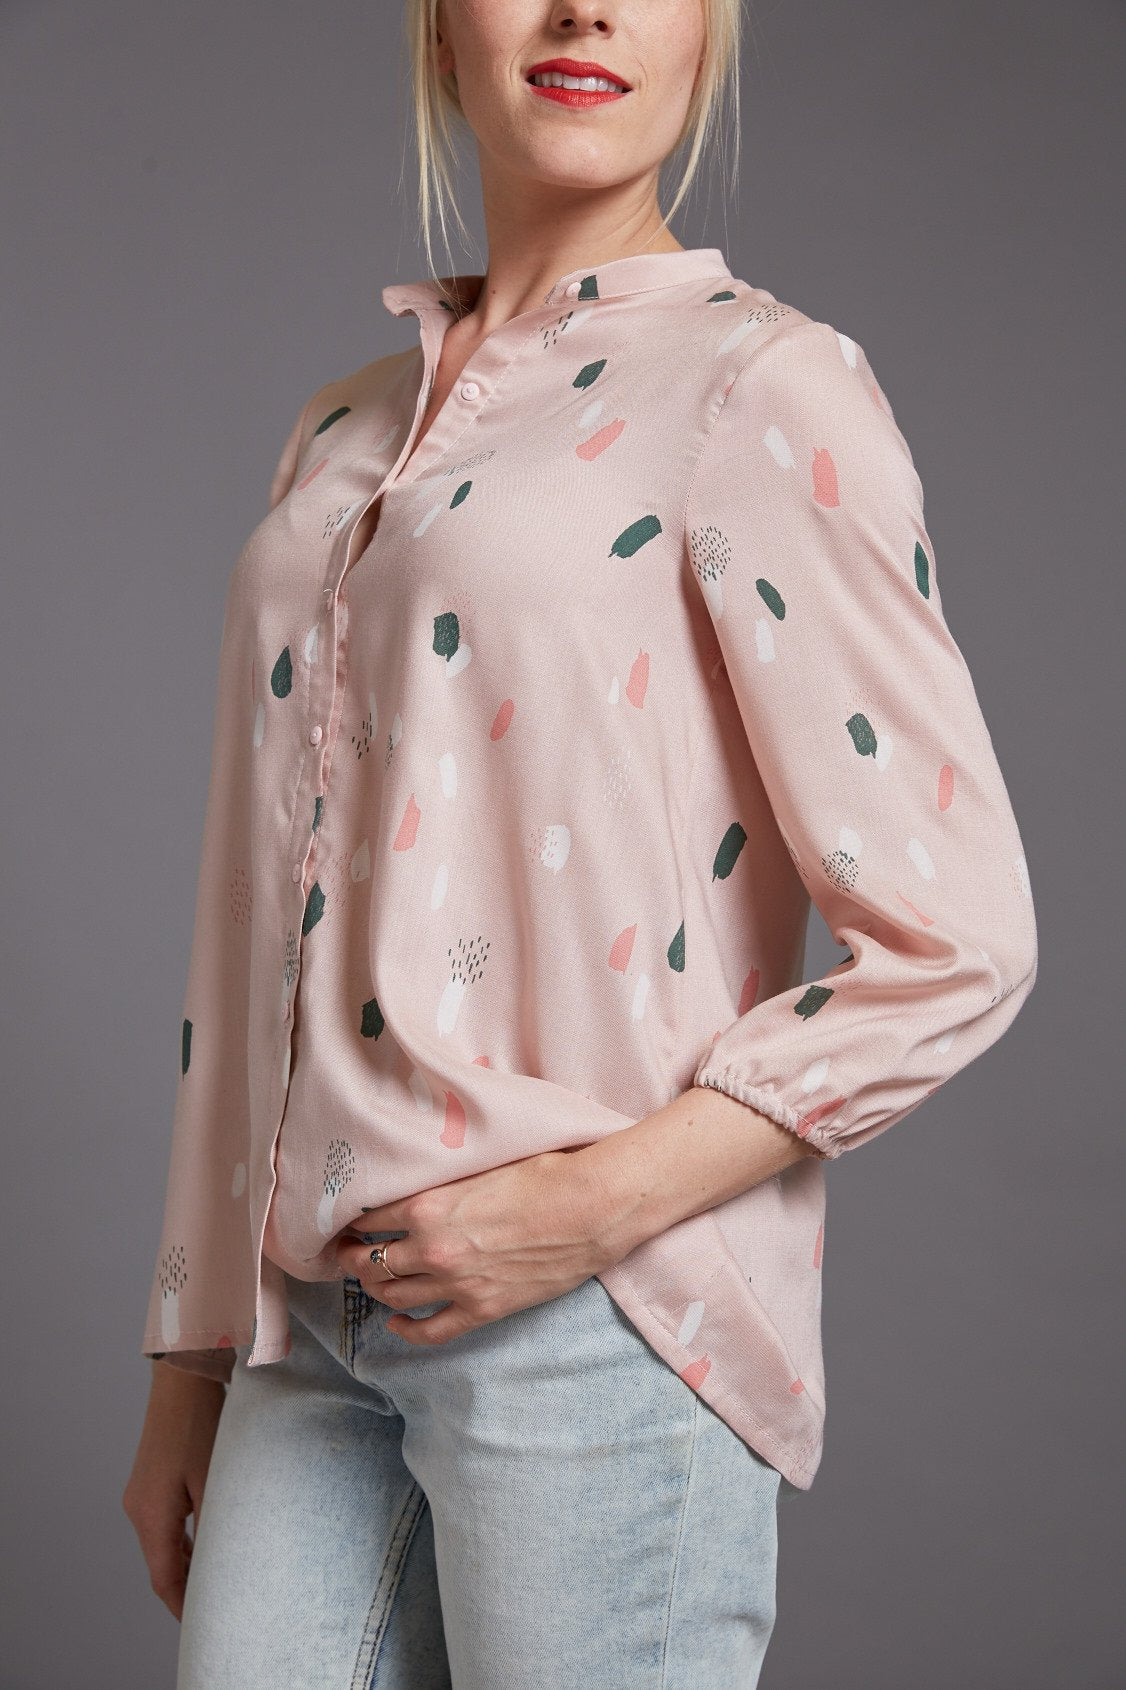 The Avid Seamstress THE BLOUSE - Sewing Pattern